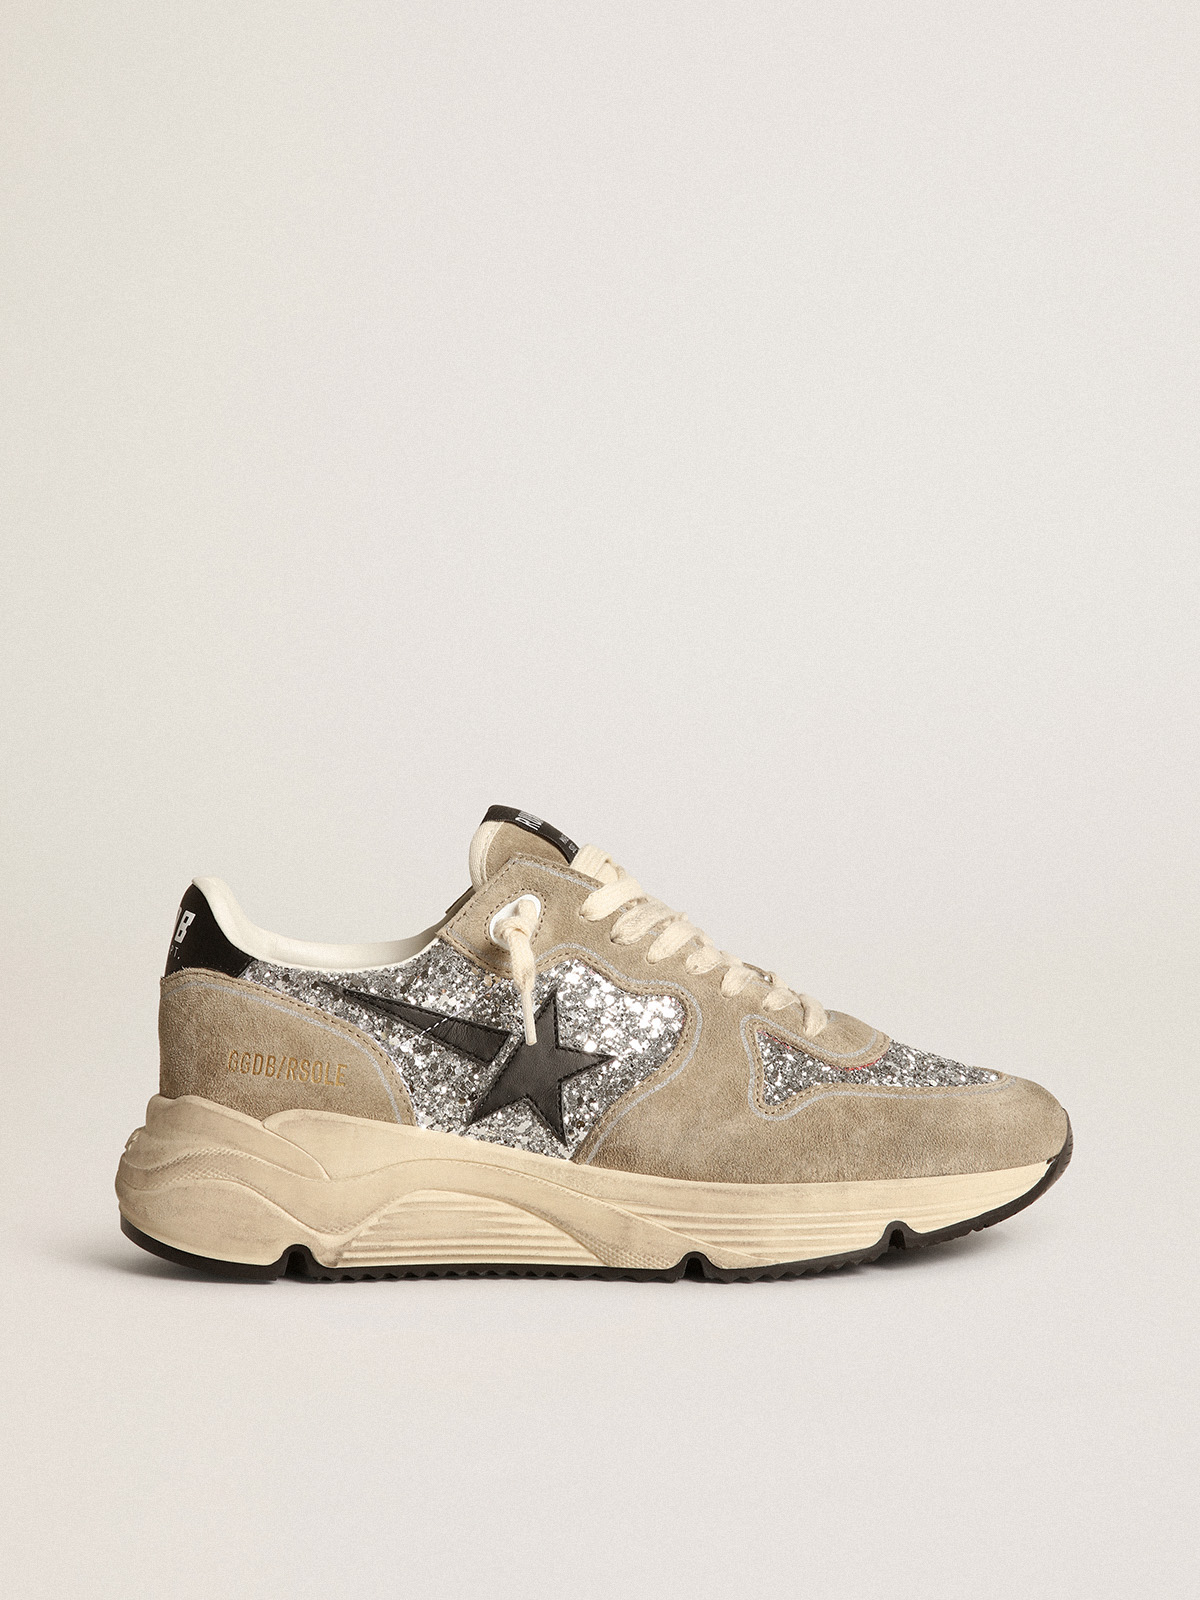 Women\'s Running Sole in silver glitter and dove gray suede | Golden Goose